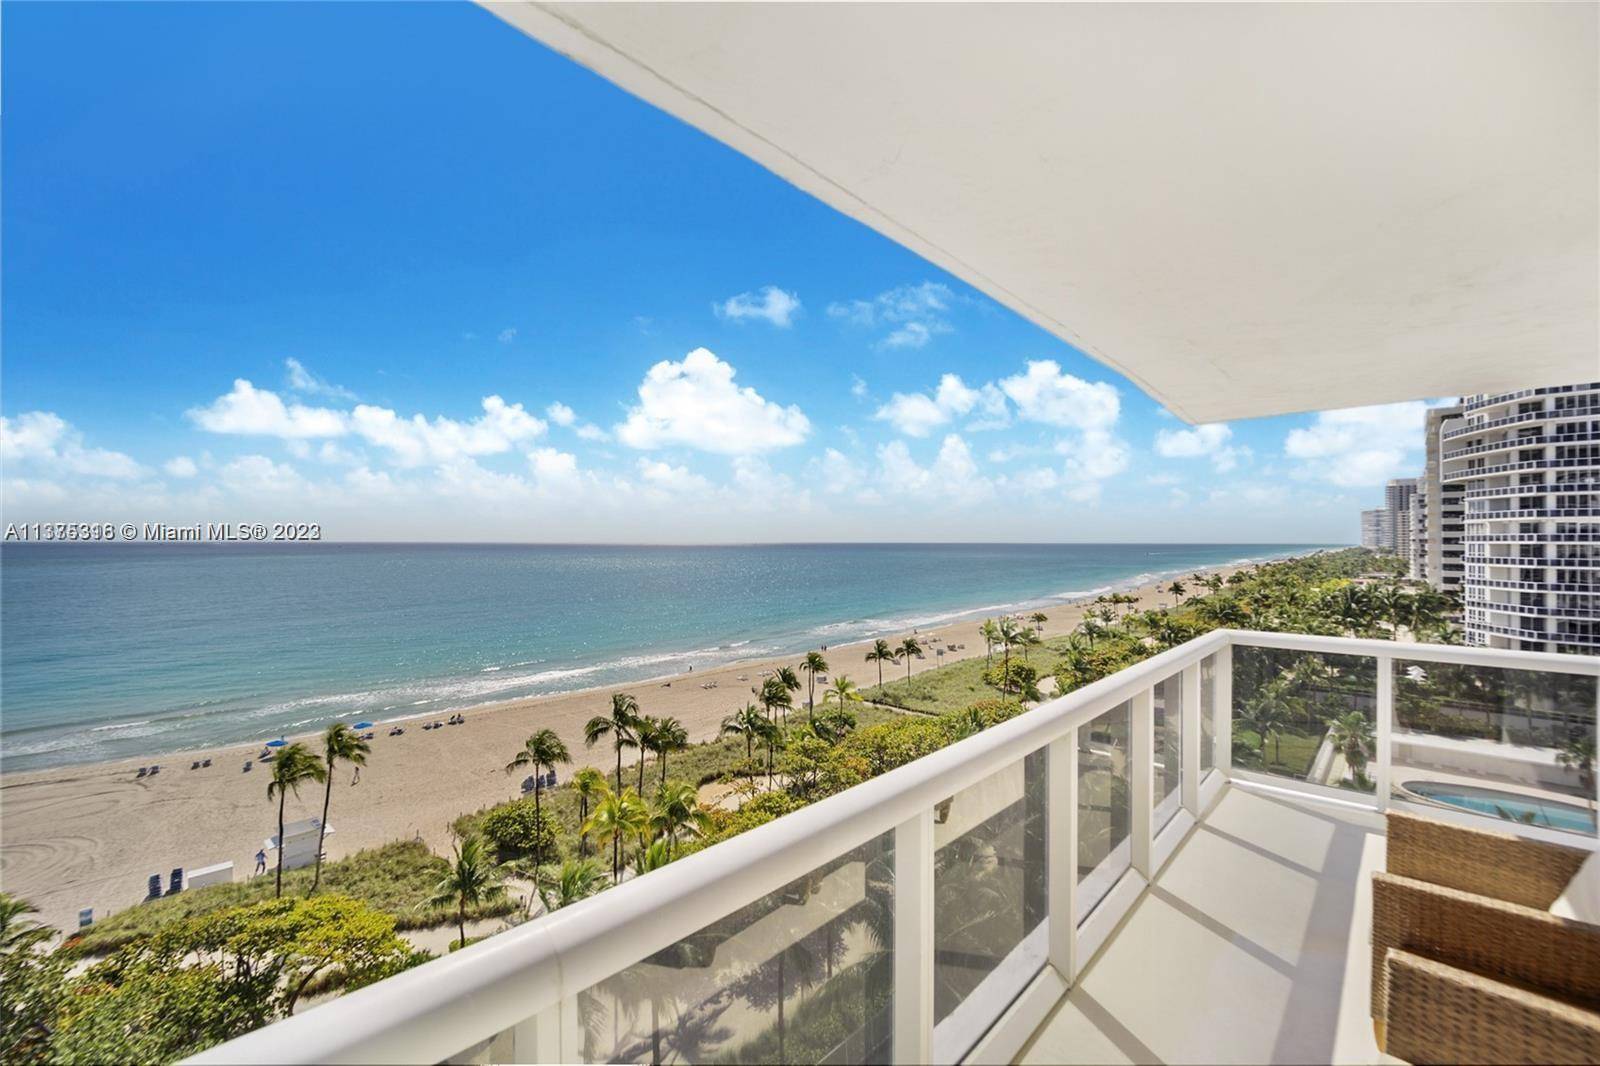 Beautifully furnished and remodeled unit with full ocean views and wrap around balcony.